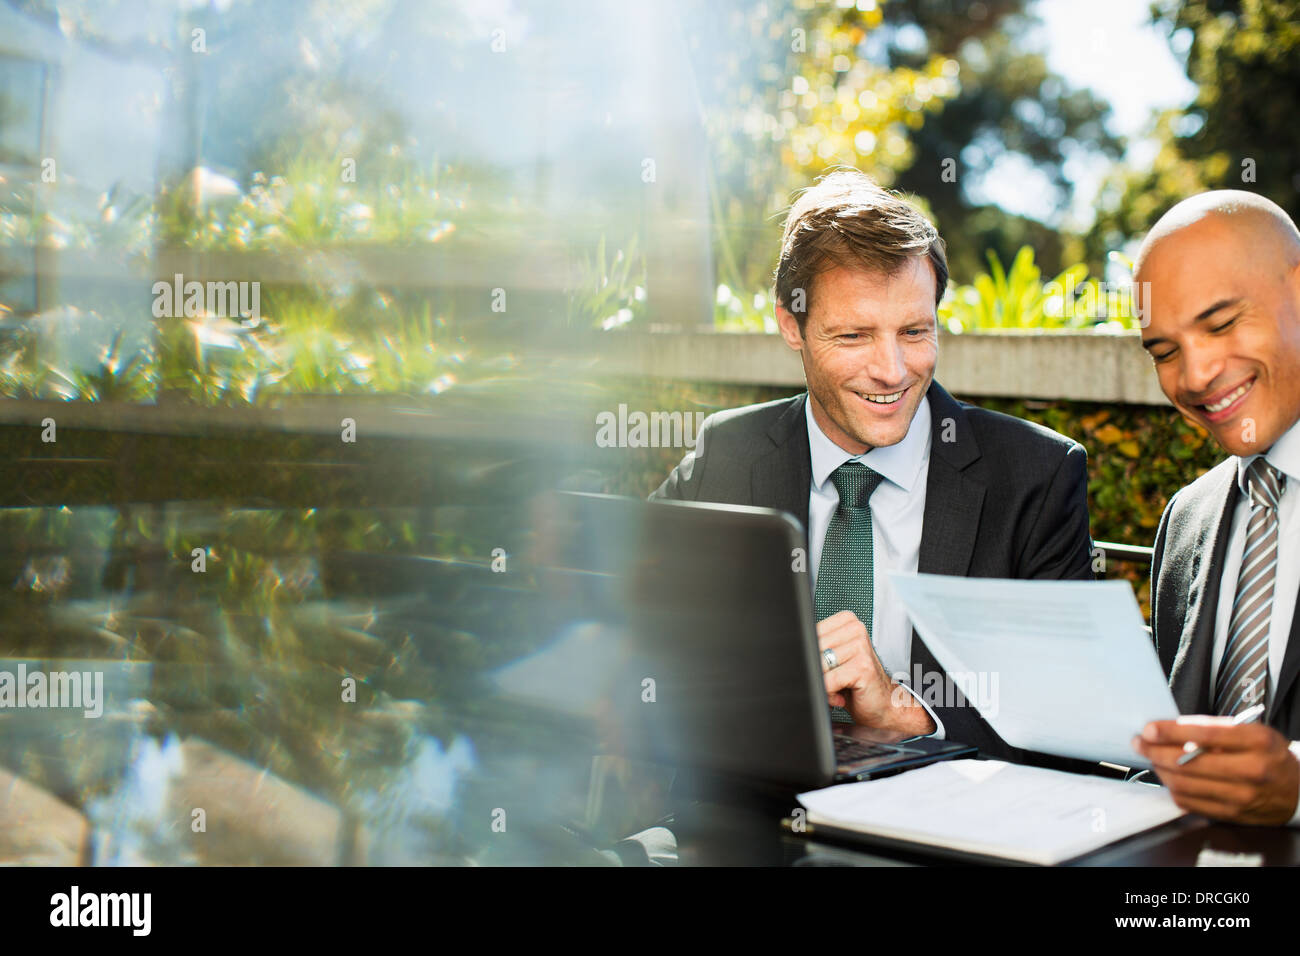 Businessmen working together outdoors Stock Photo